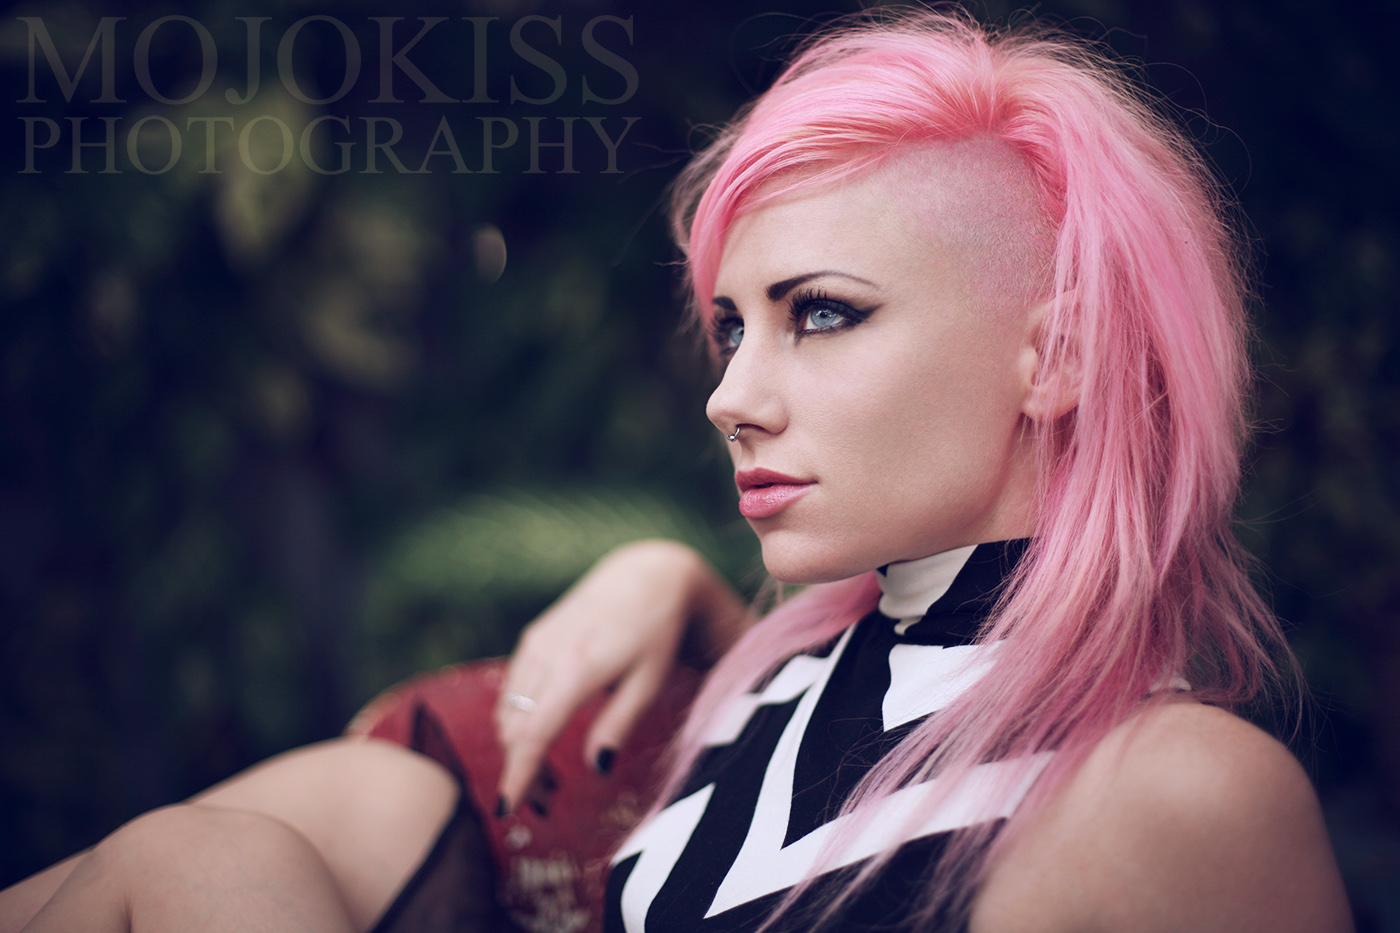 pink hair, professional portrait photographer in st pete, tampa bay